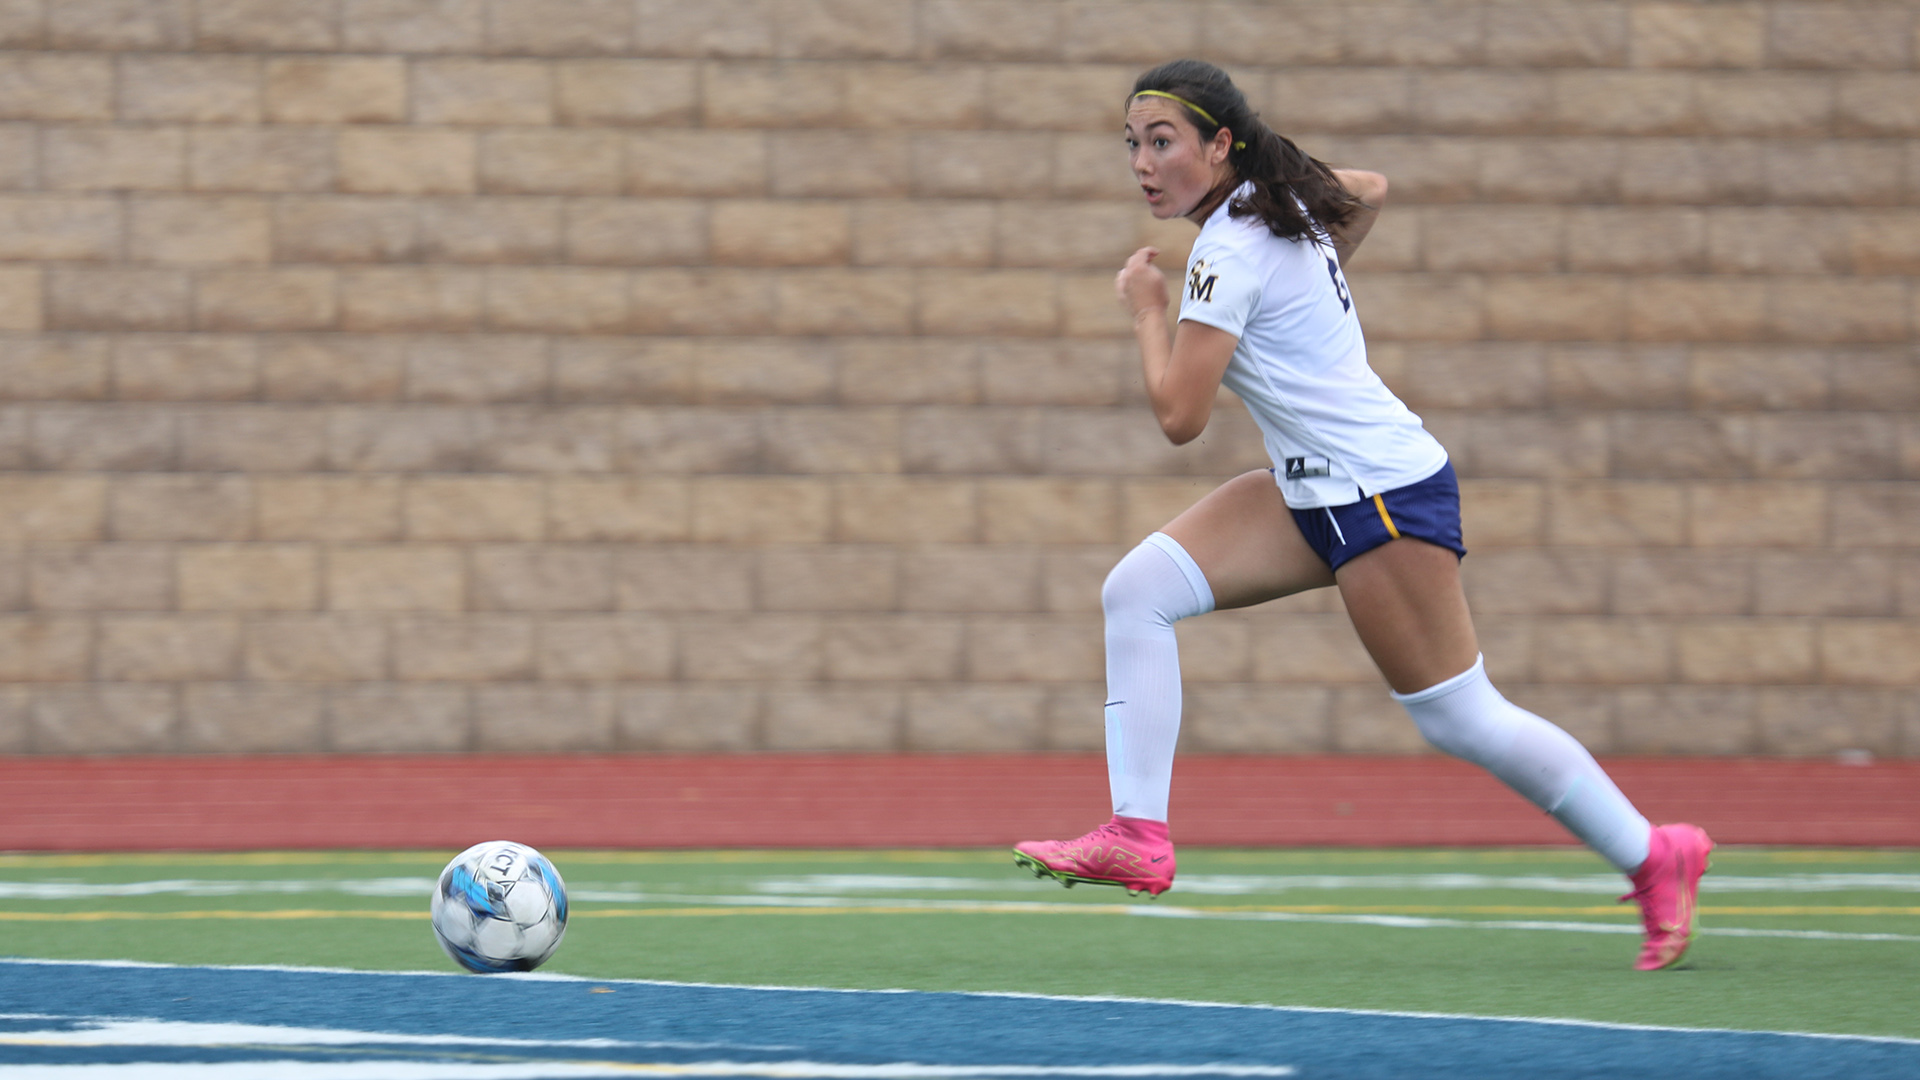 Hallier's Late Goal Give Spires a 1-1 Tie Against Valor